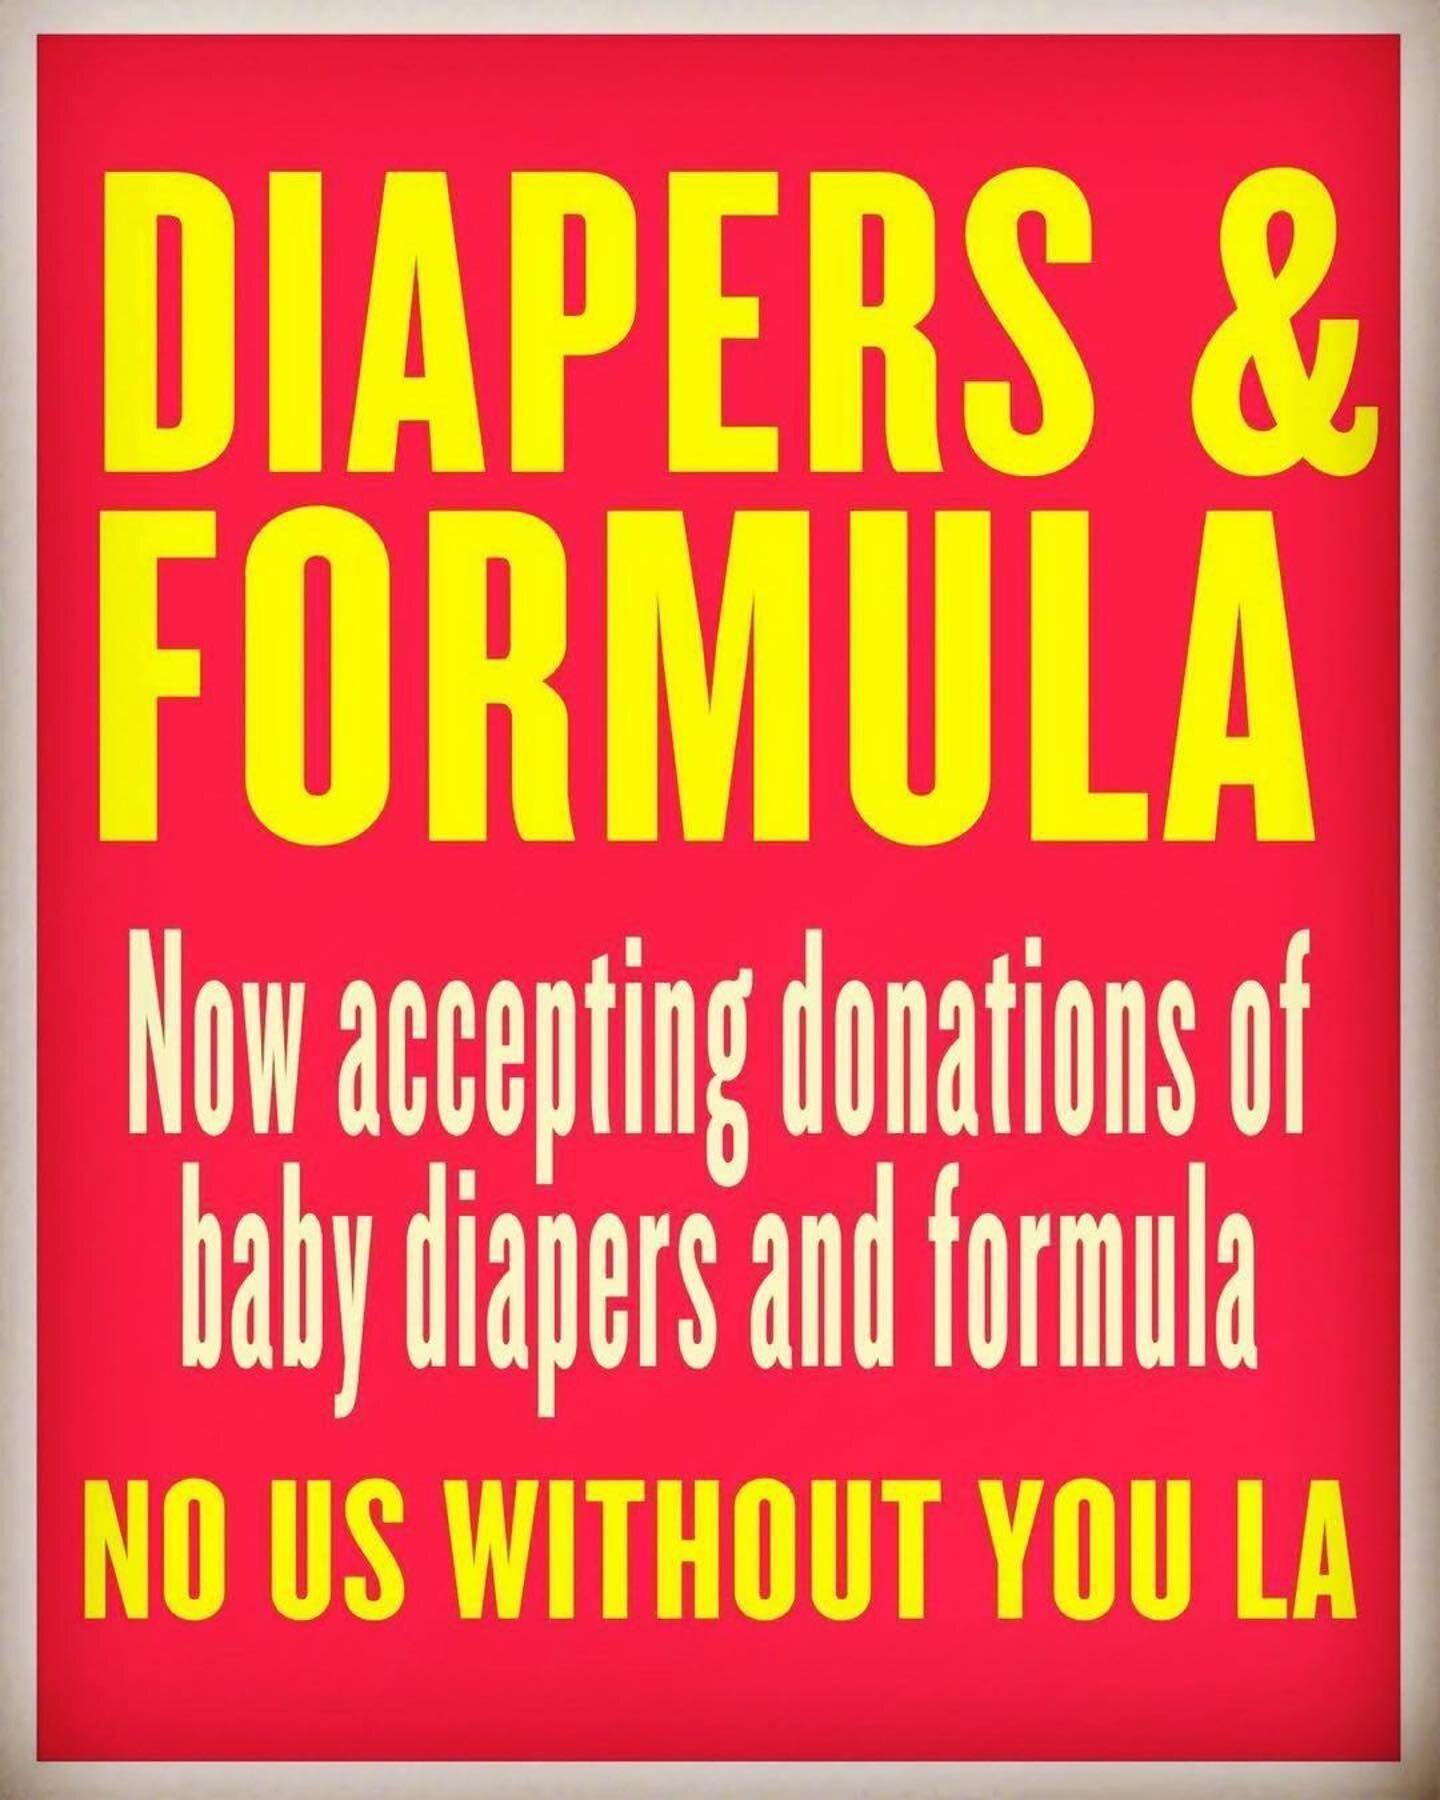 Please help!
We&rsquo;d love if you&rsquo;d could sponsor a family with small children. 
There&rsquo;s an urgent need for baby formula, diapers and wipes for families in our program. 

Please DM us for more information on how to donate directly via o